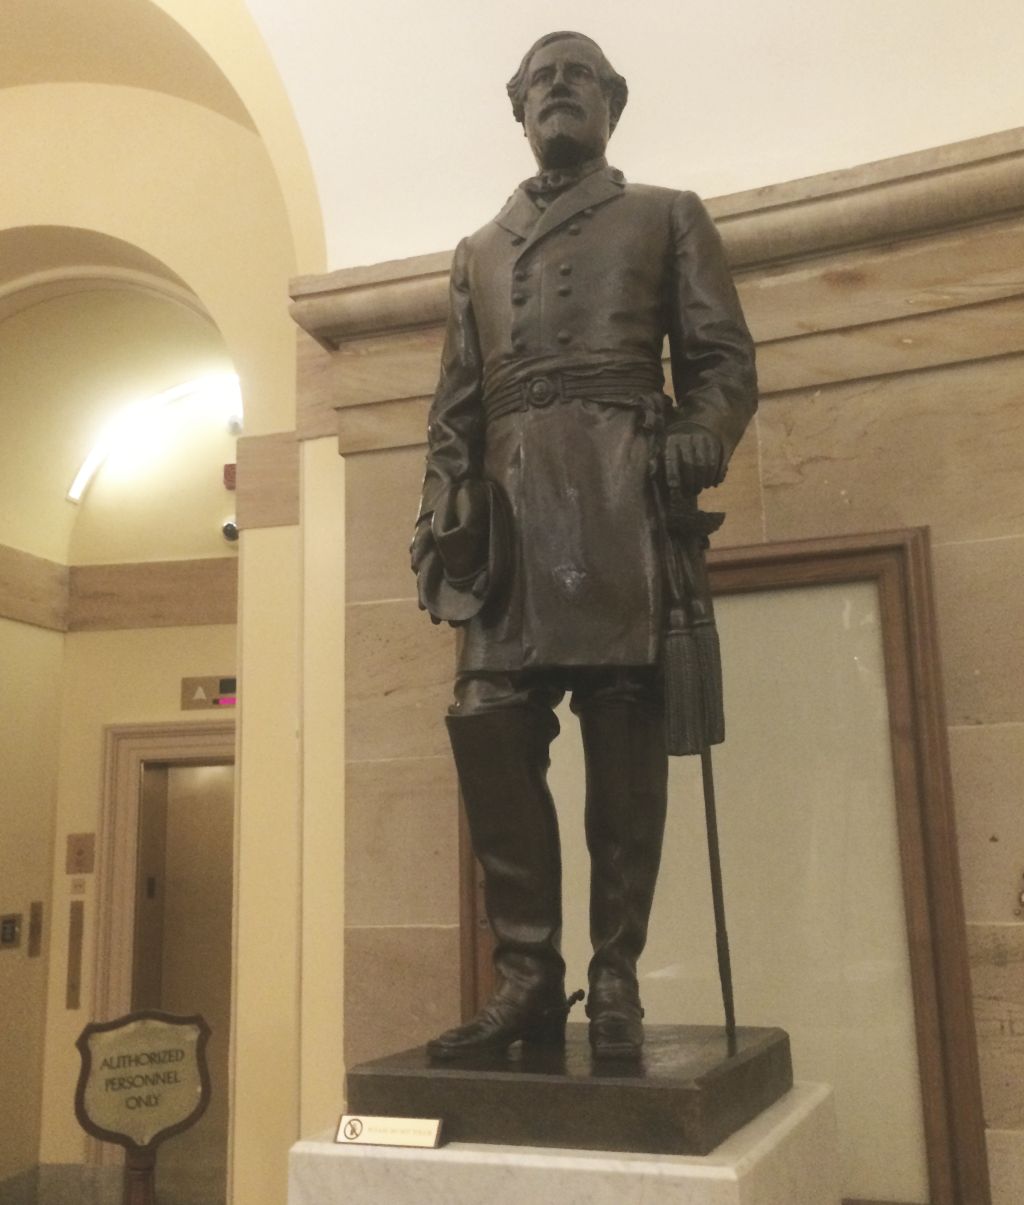 A statue of Robert E. Lee stands in the Capitol's crypt. Although widely admired, Lee also led troops fighting the U.S. in 14 battles causing an estimated 126,000 casualties among U.S. military. Photo Jamie Steihm.